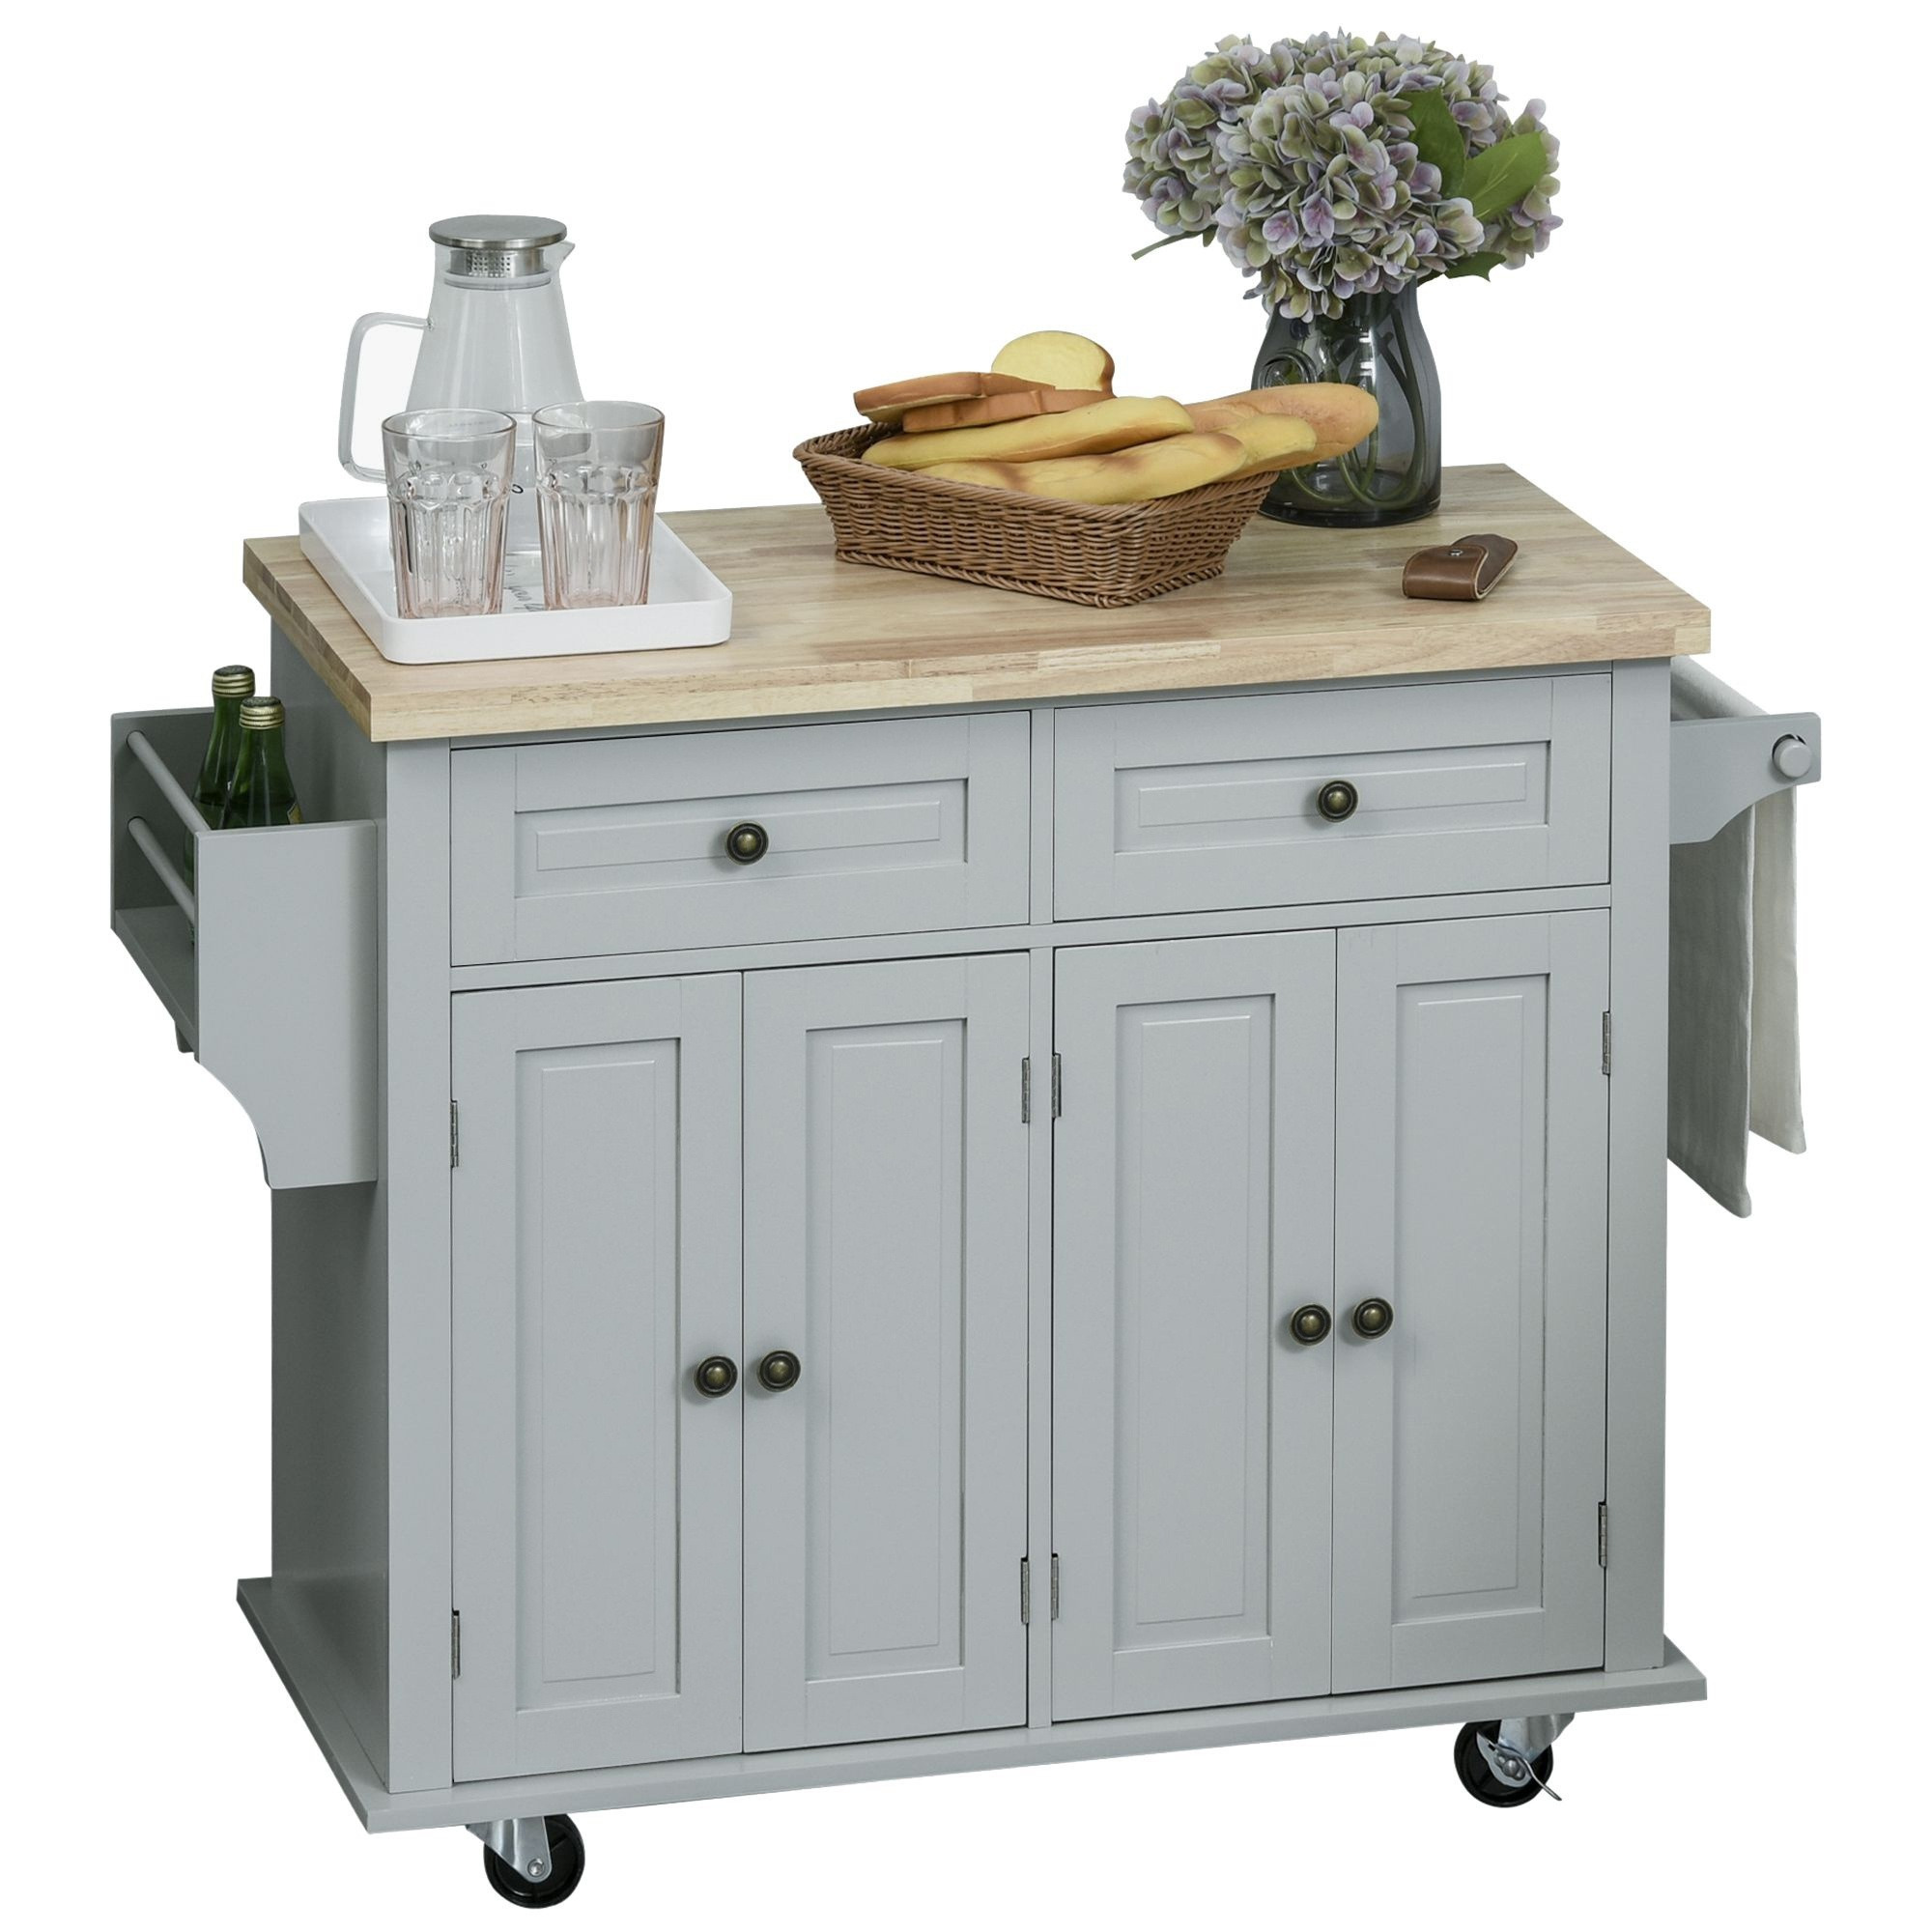 HOMCOM Rolling Kitchen Island Storage Trolley with Rubber Wood Top & Drawers for Dining Room, Grey